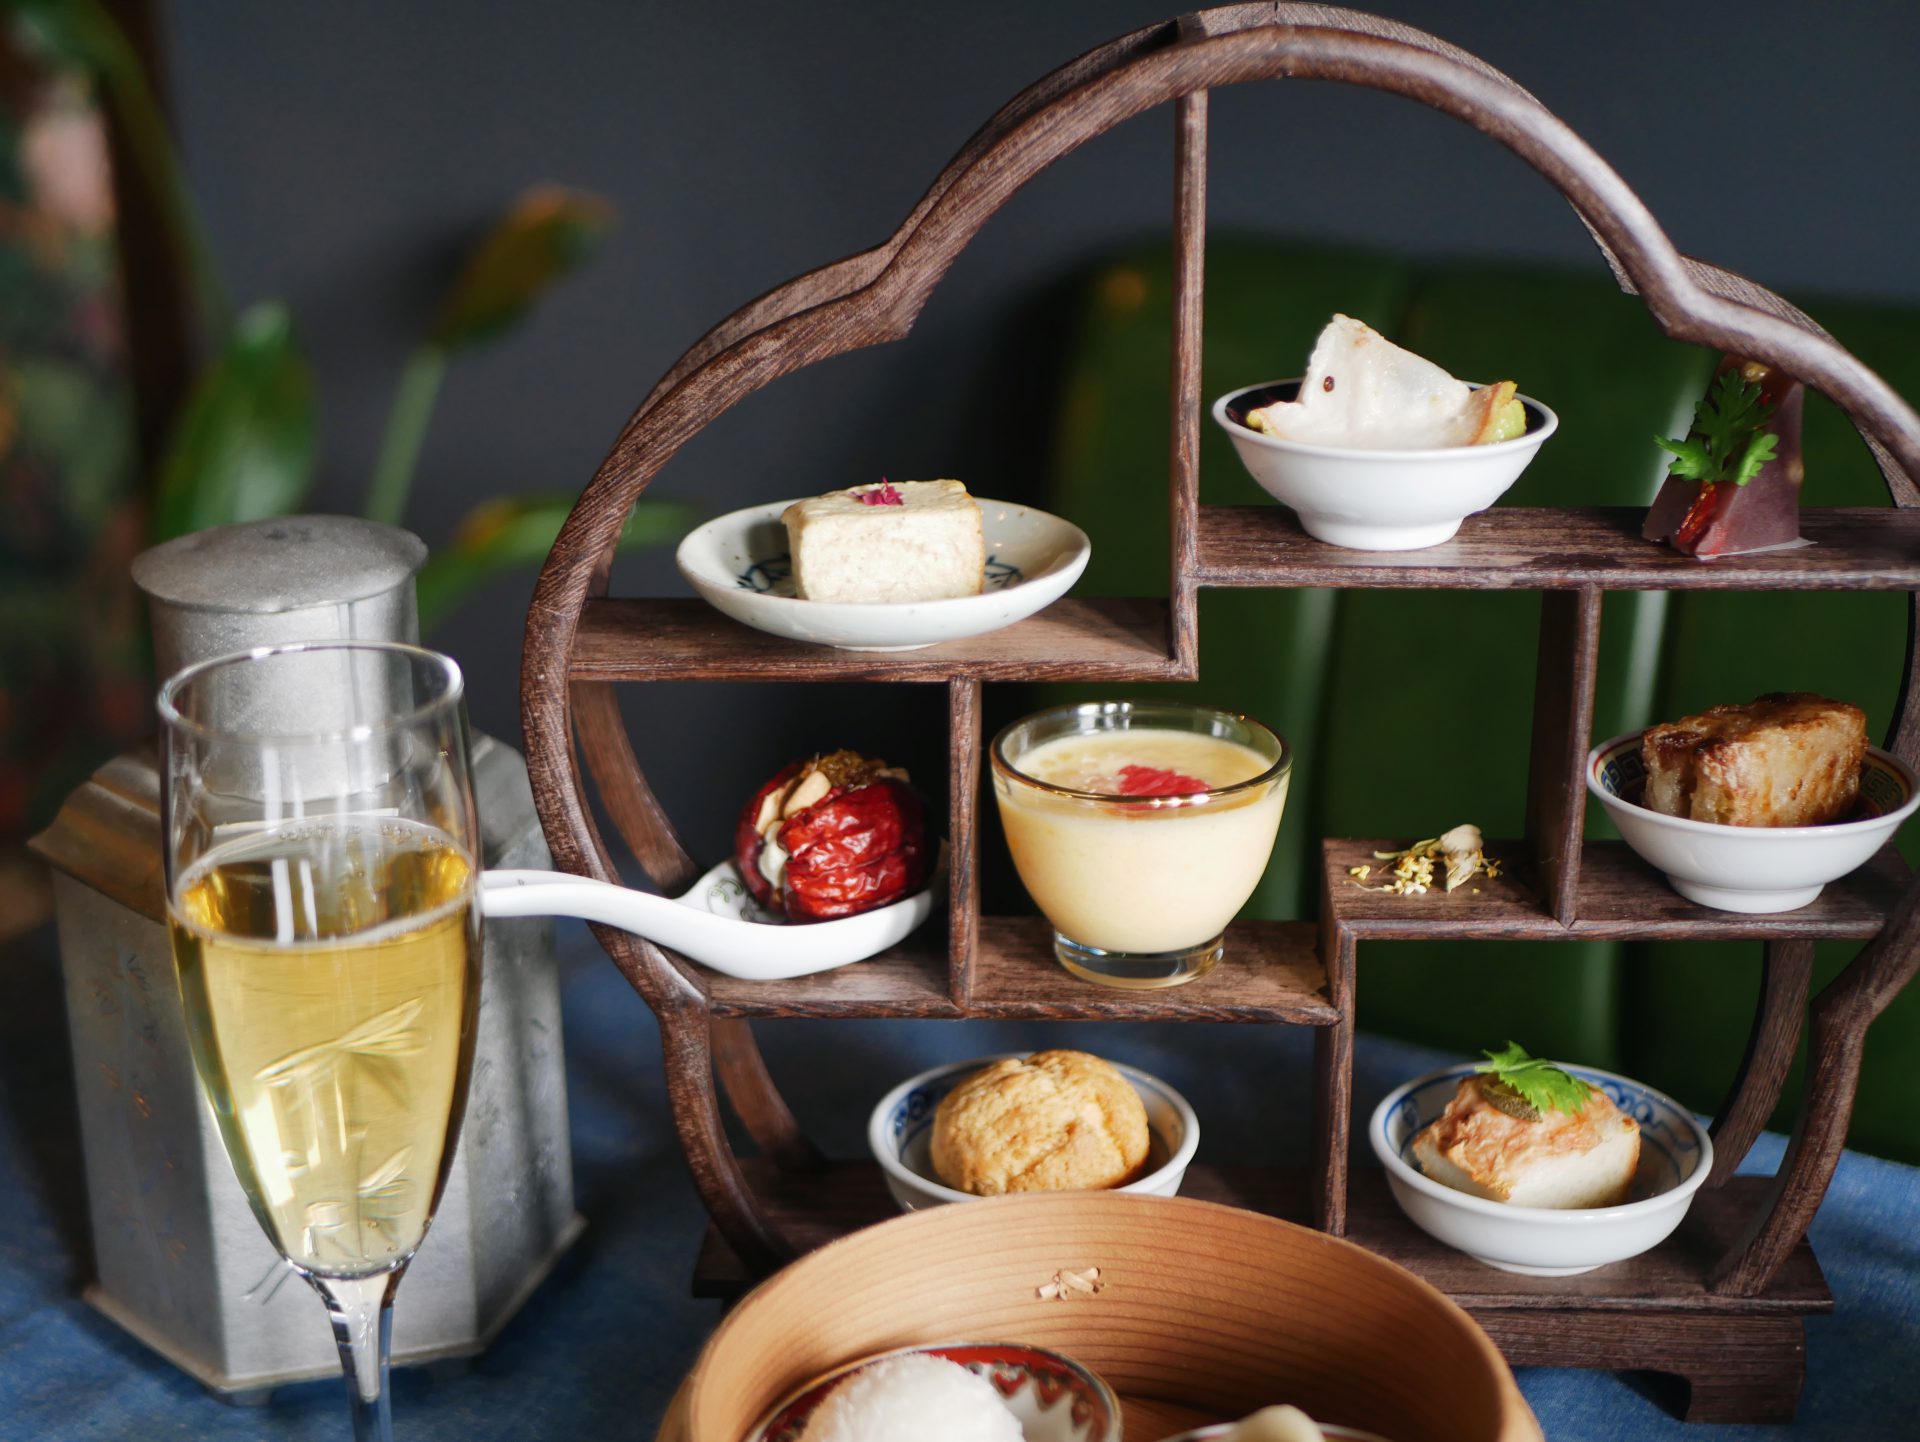 Hong Kong meals for everyday beauty and wellness